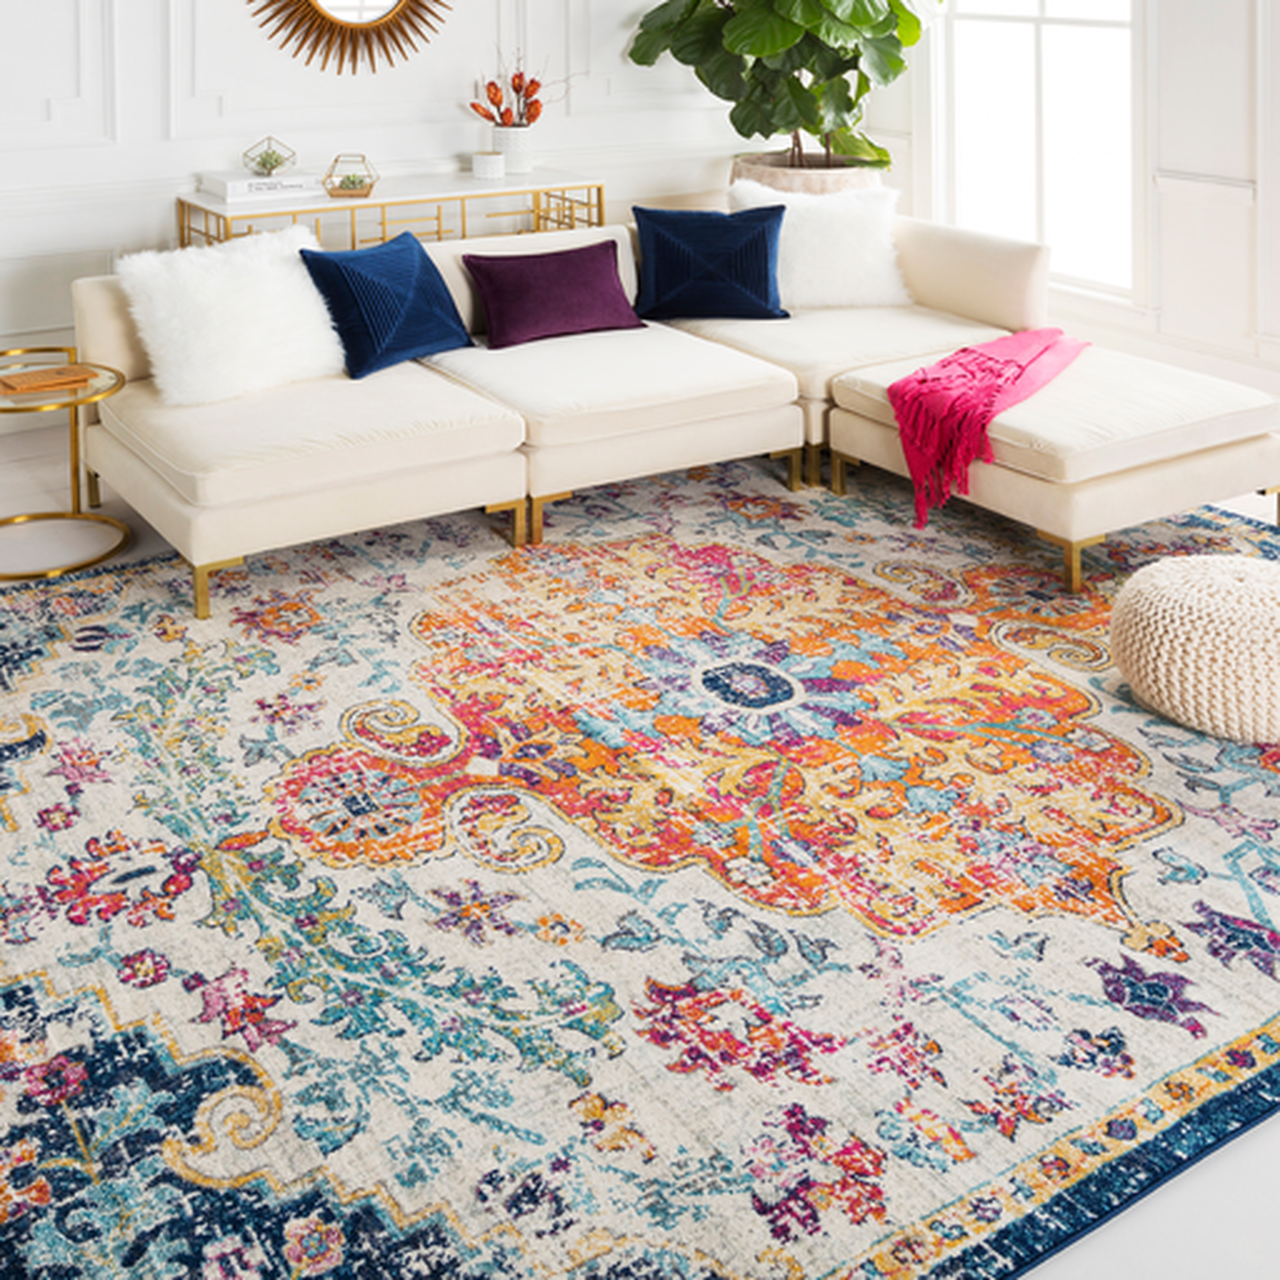 the colorful area rug in a living room